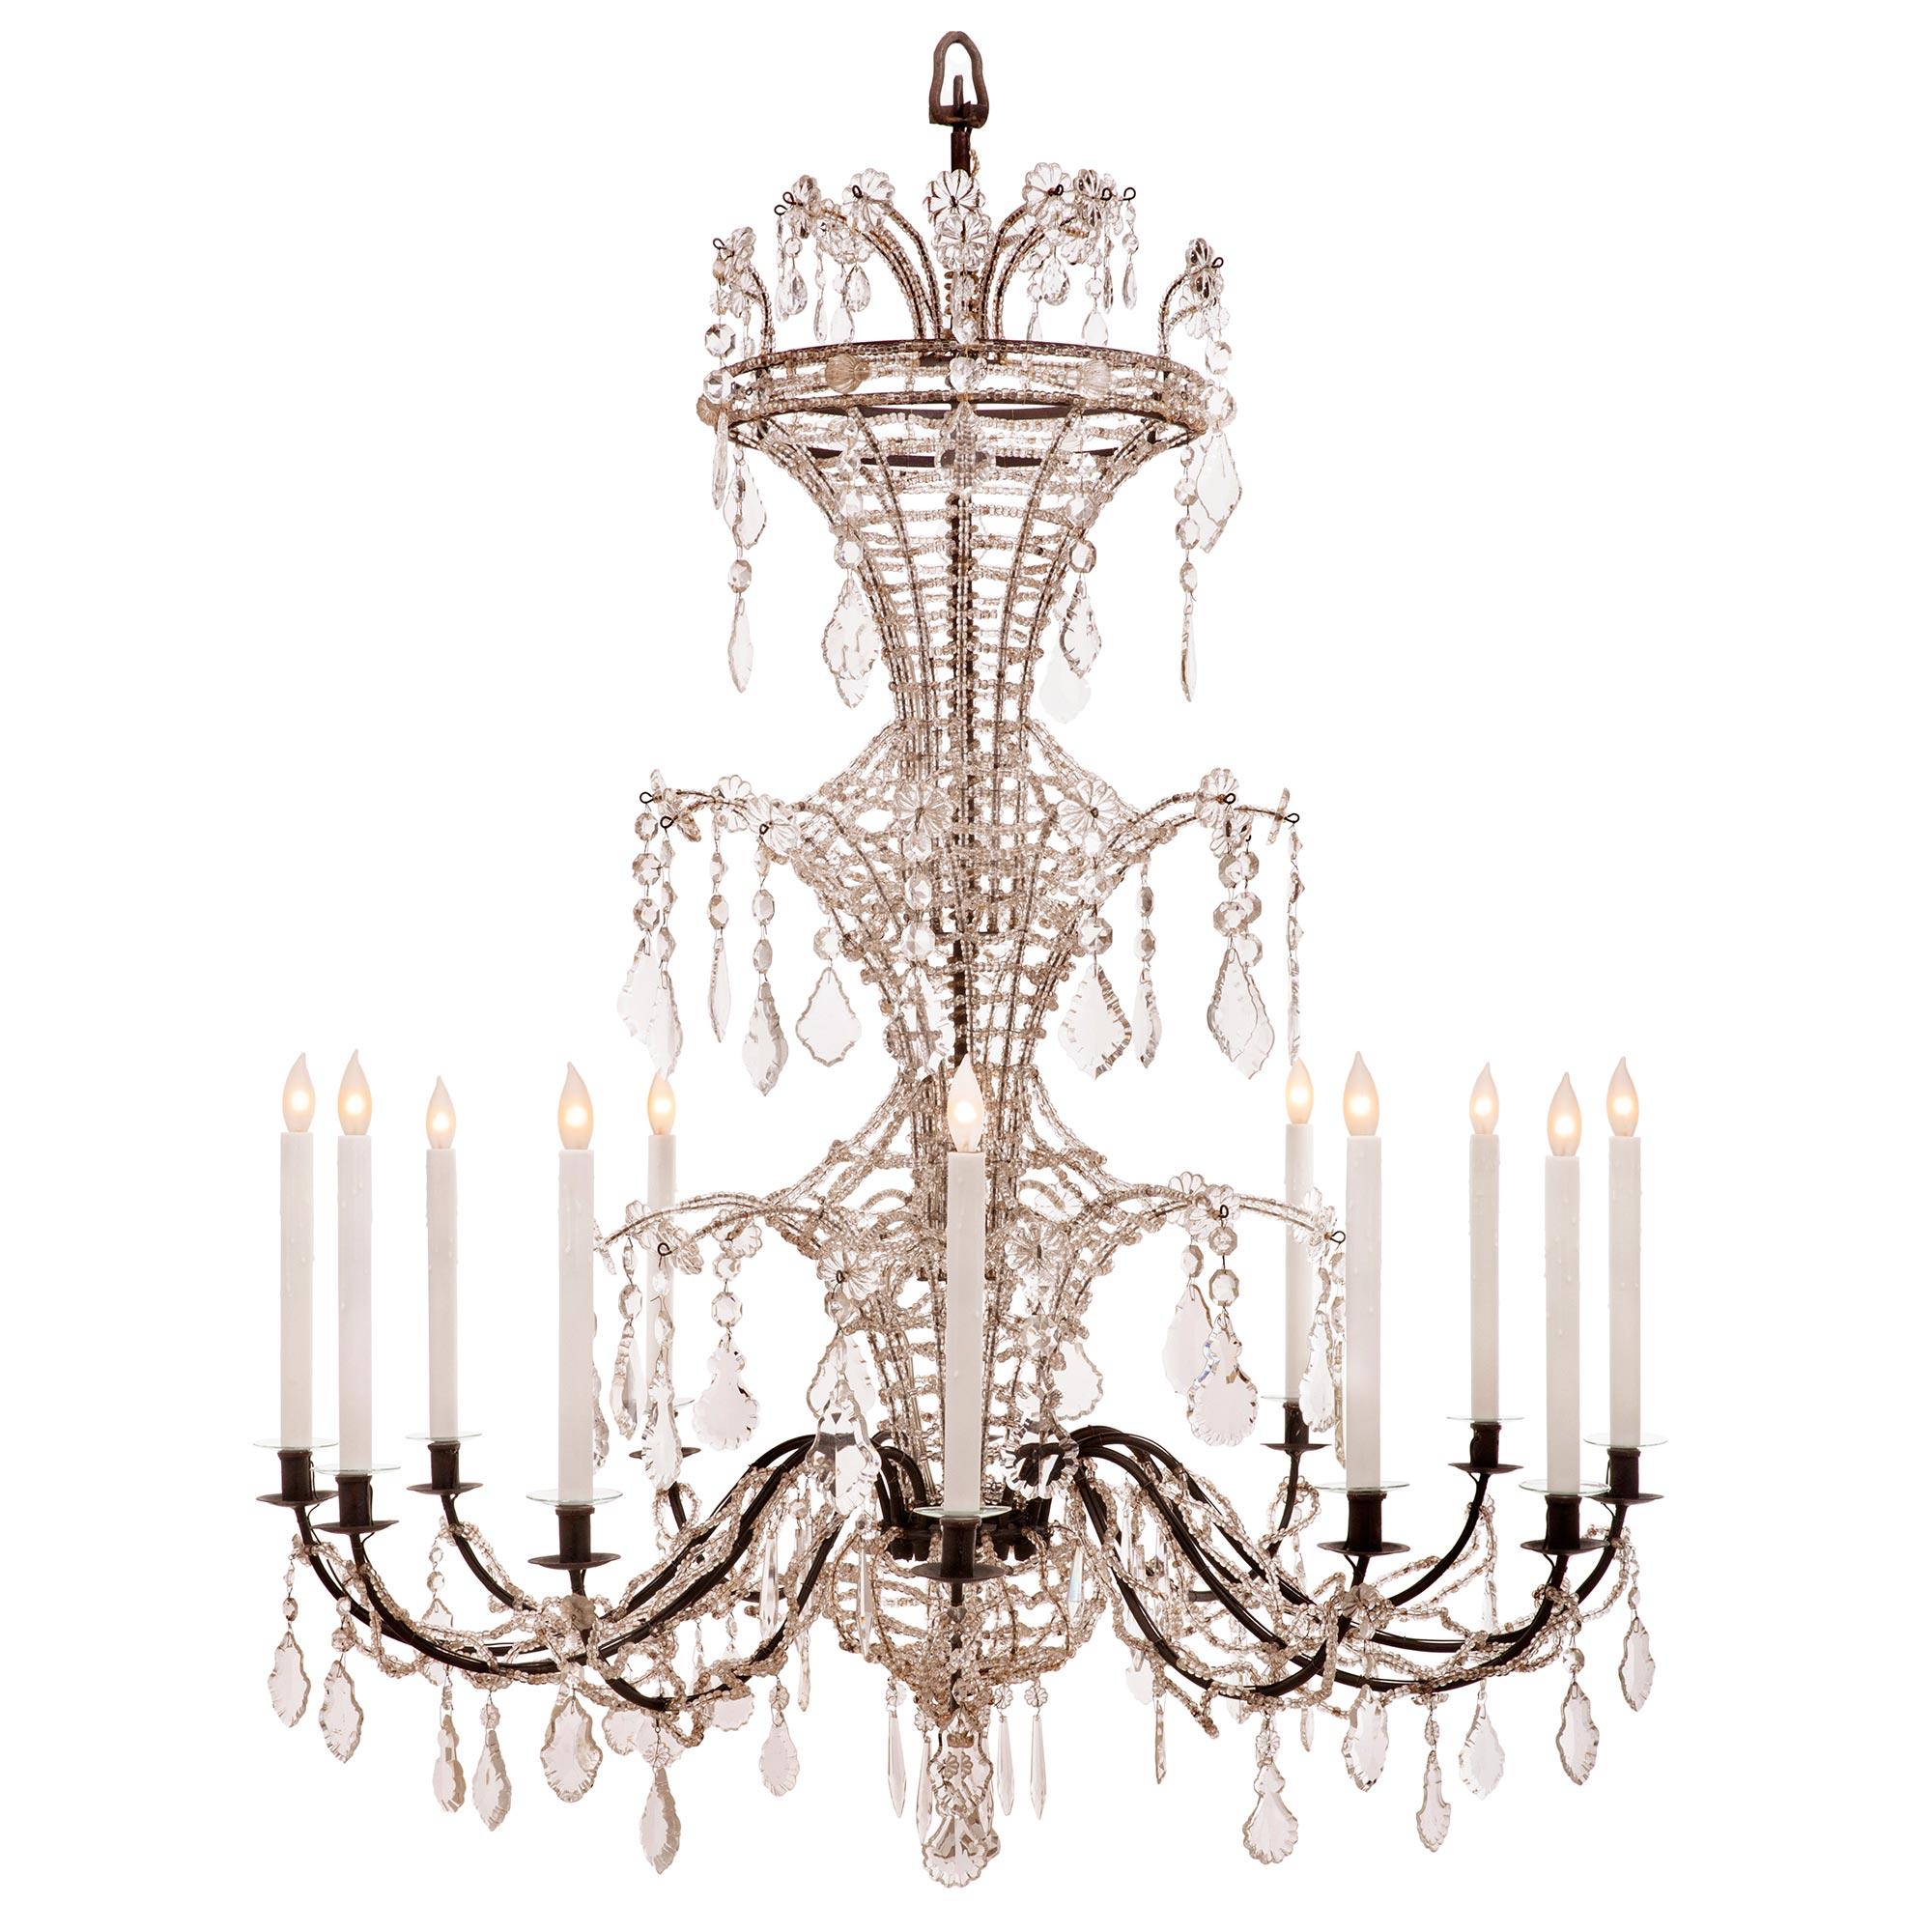 Pair of Italian Turn of the Century Iron and Crystal Venetian St. Chandeliers In Good Condition For Sale In West Palm Beach, FL